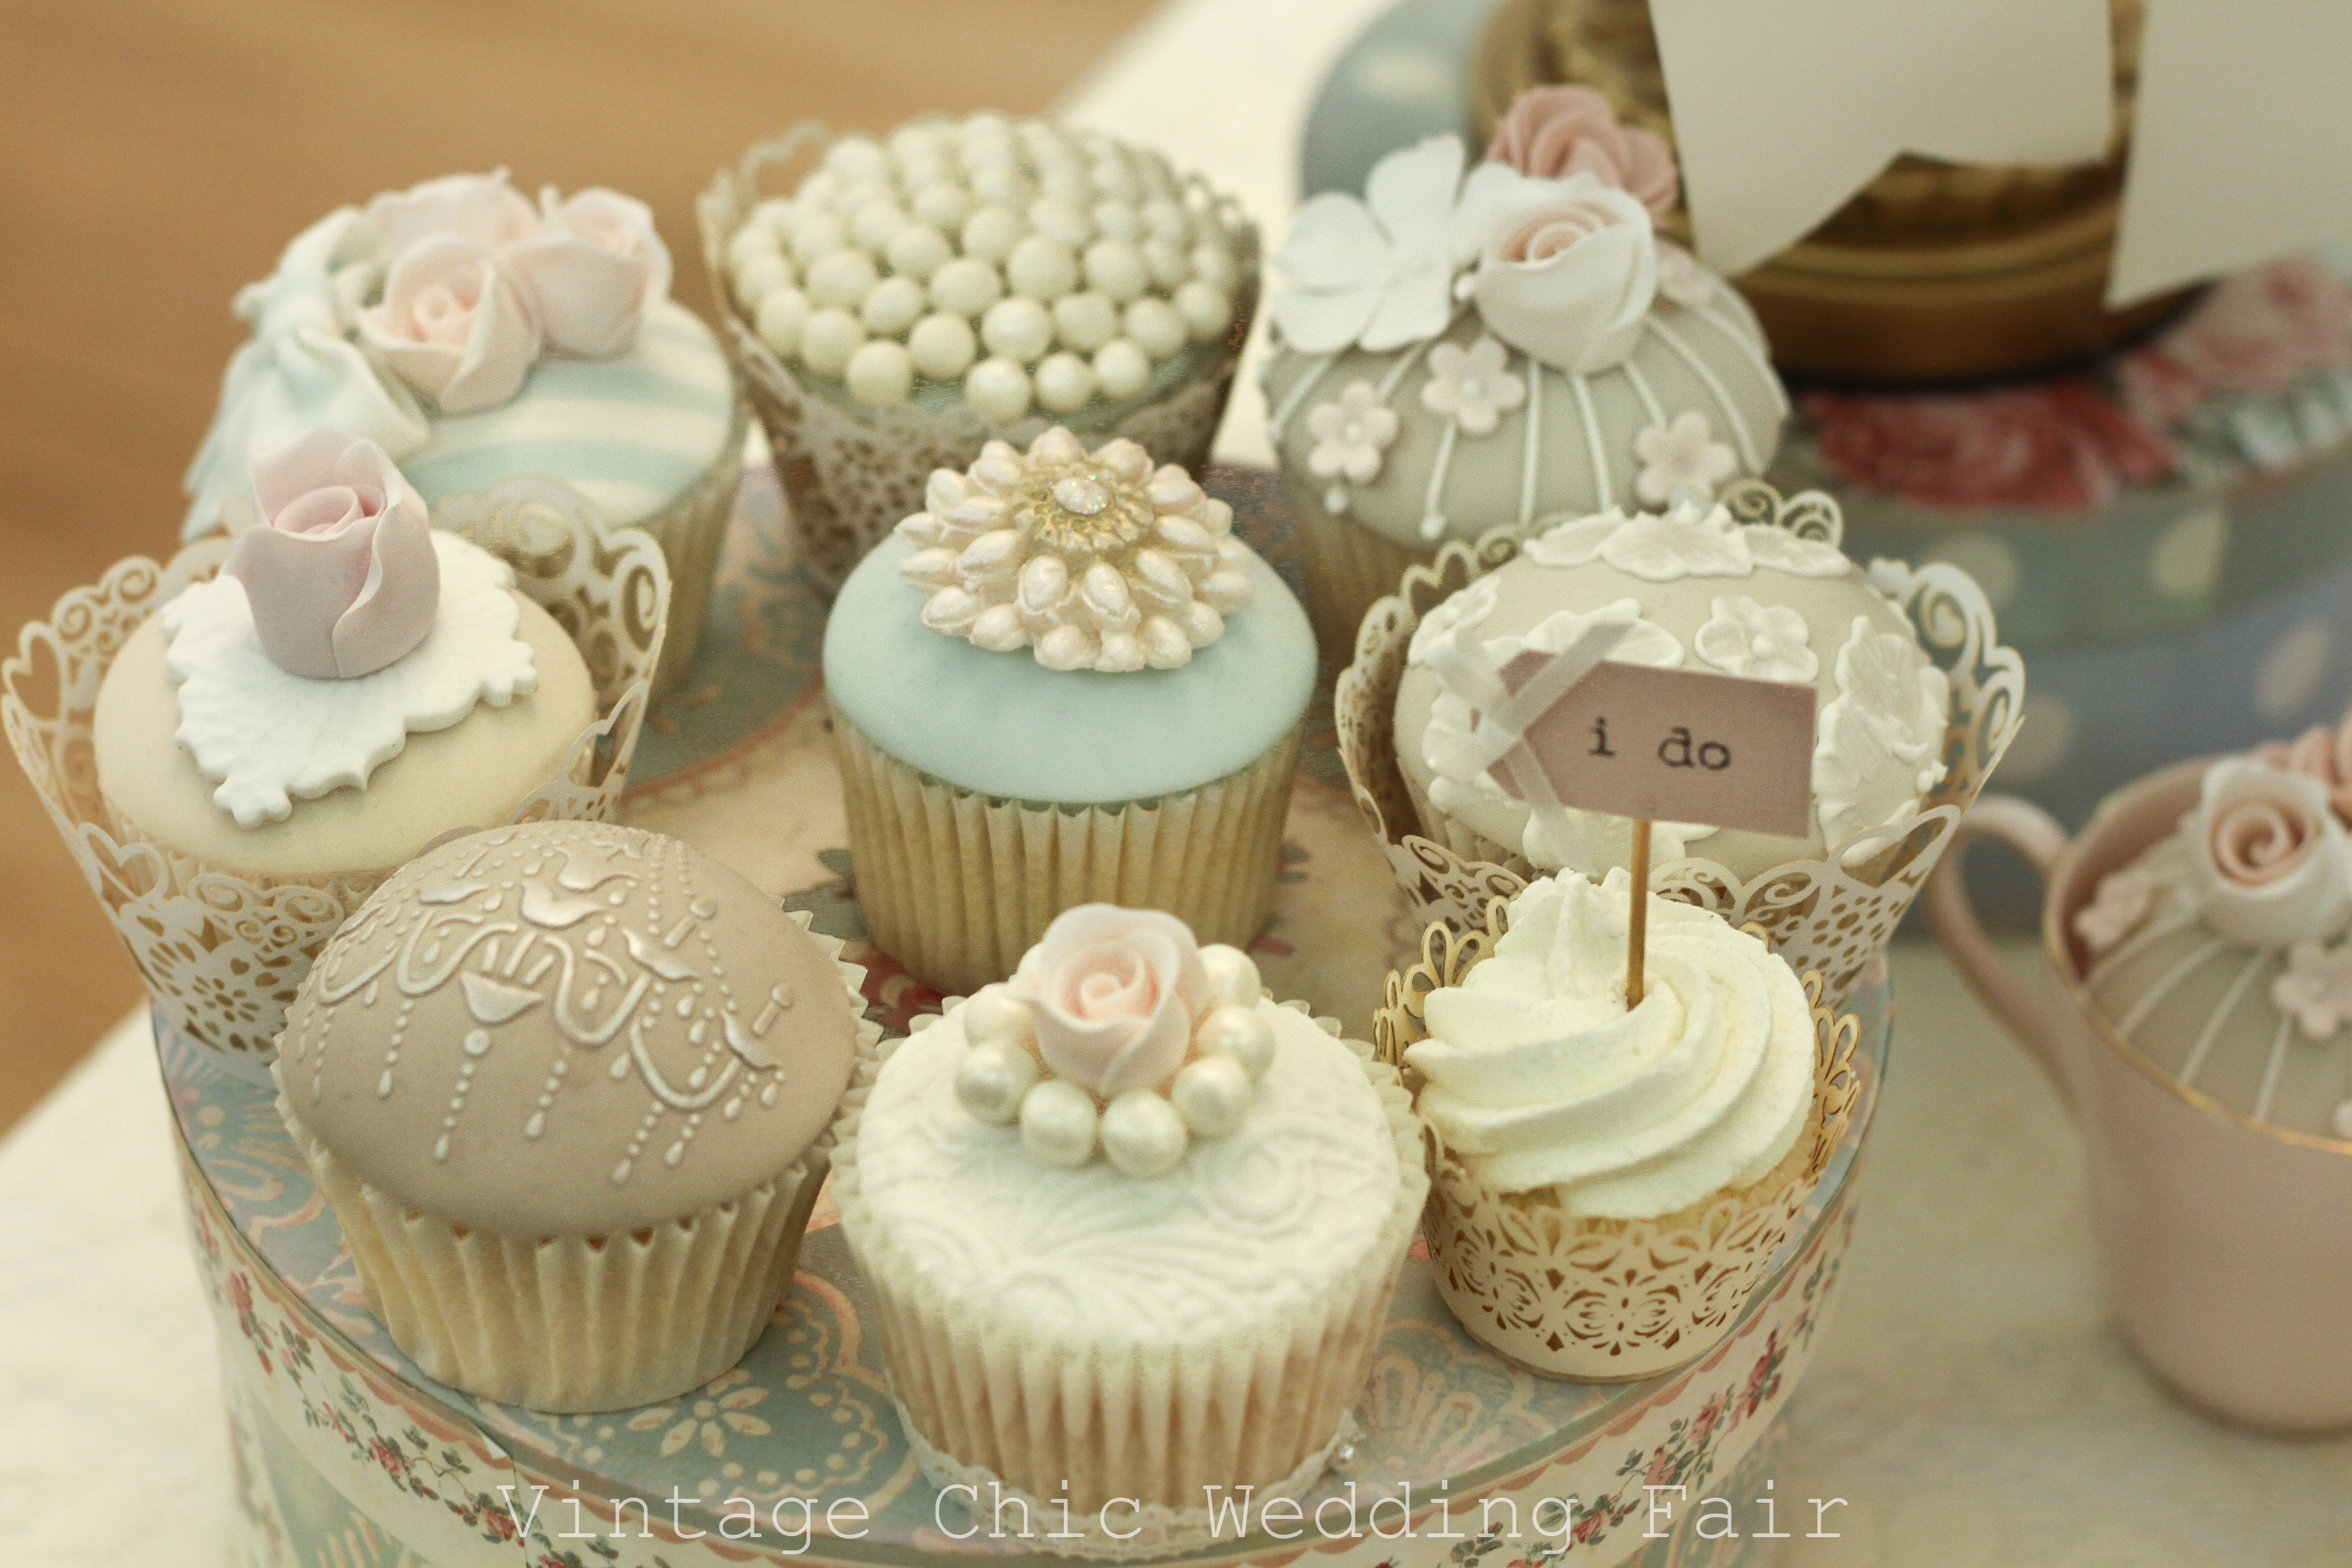 Wedding Cupcakes Decorations
 Vintage Chic Wedding Fair 22nd April part two